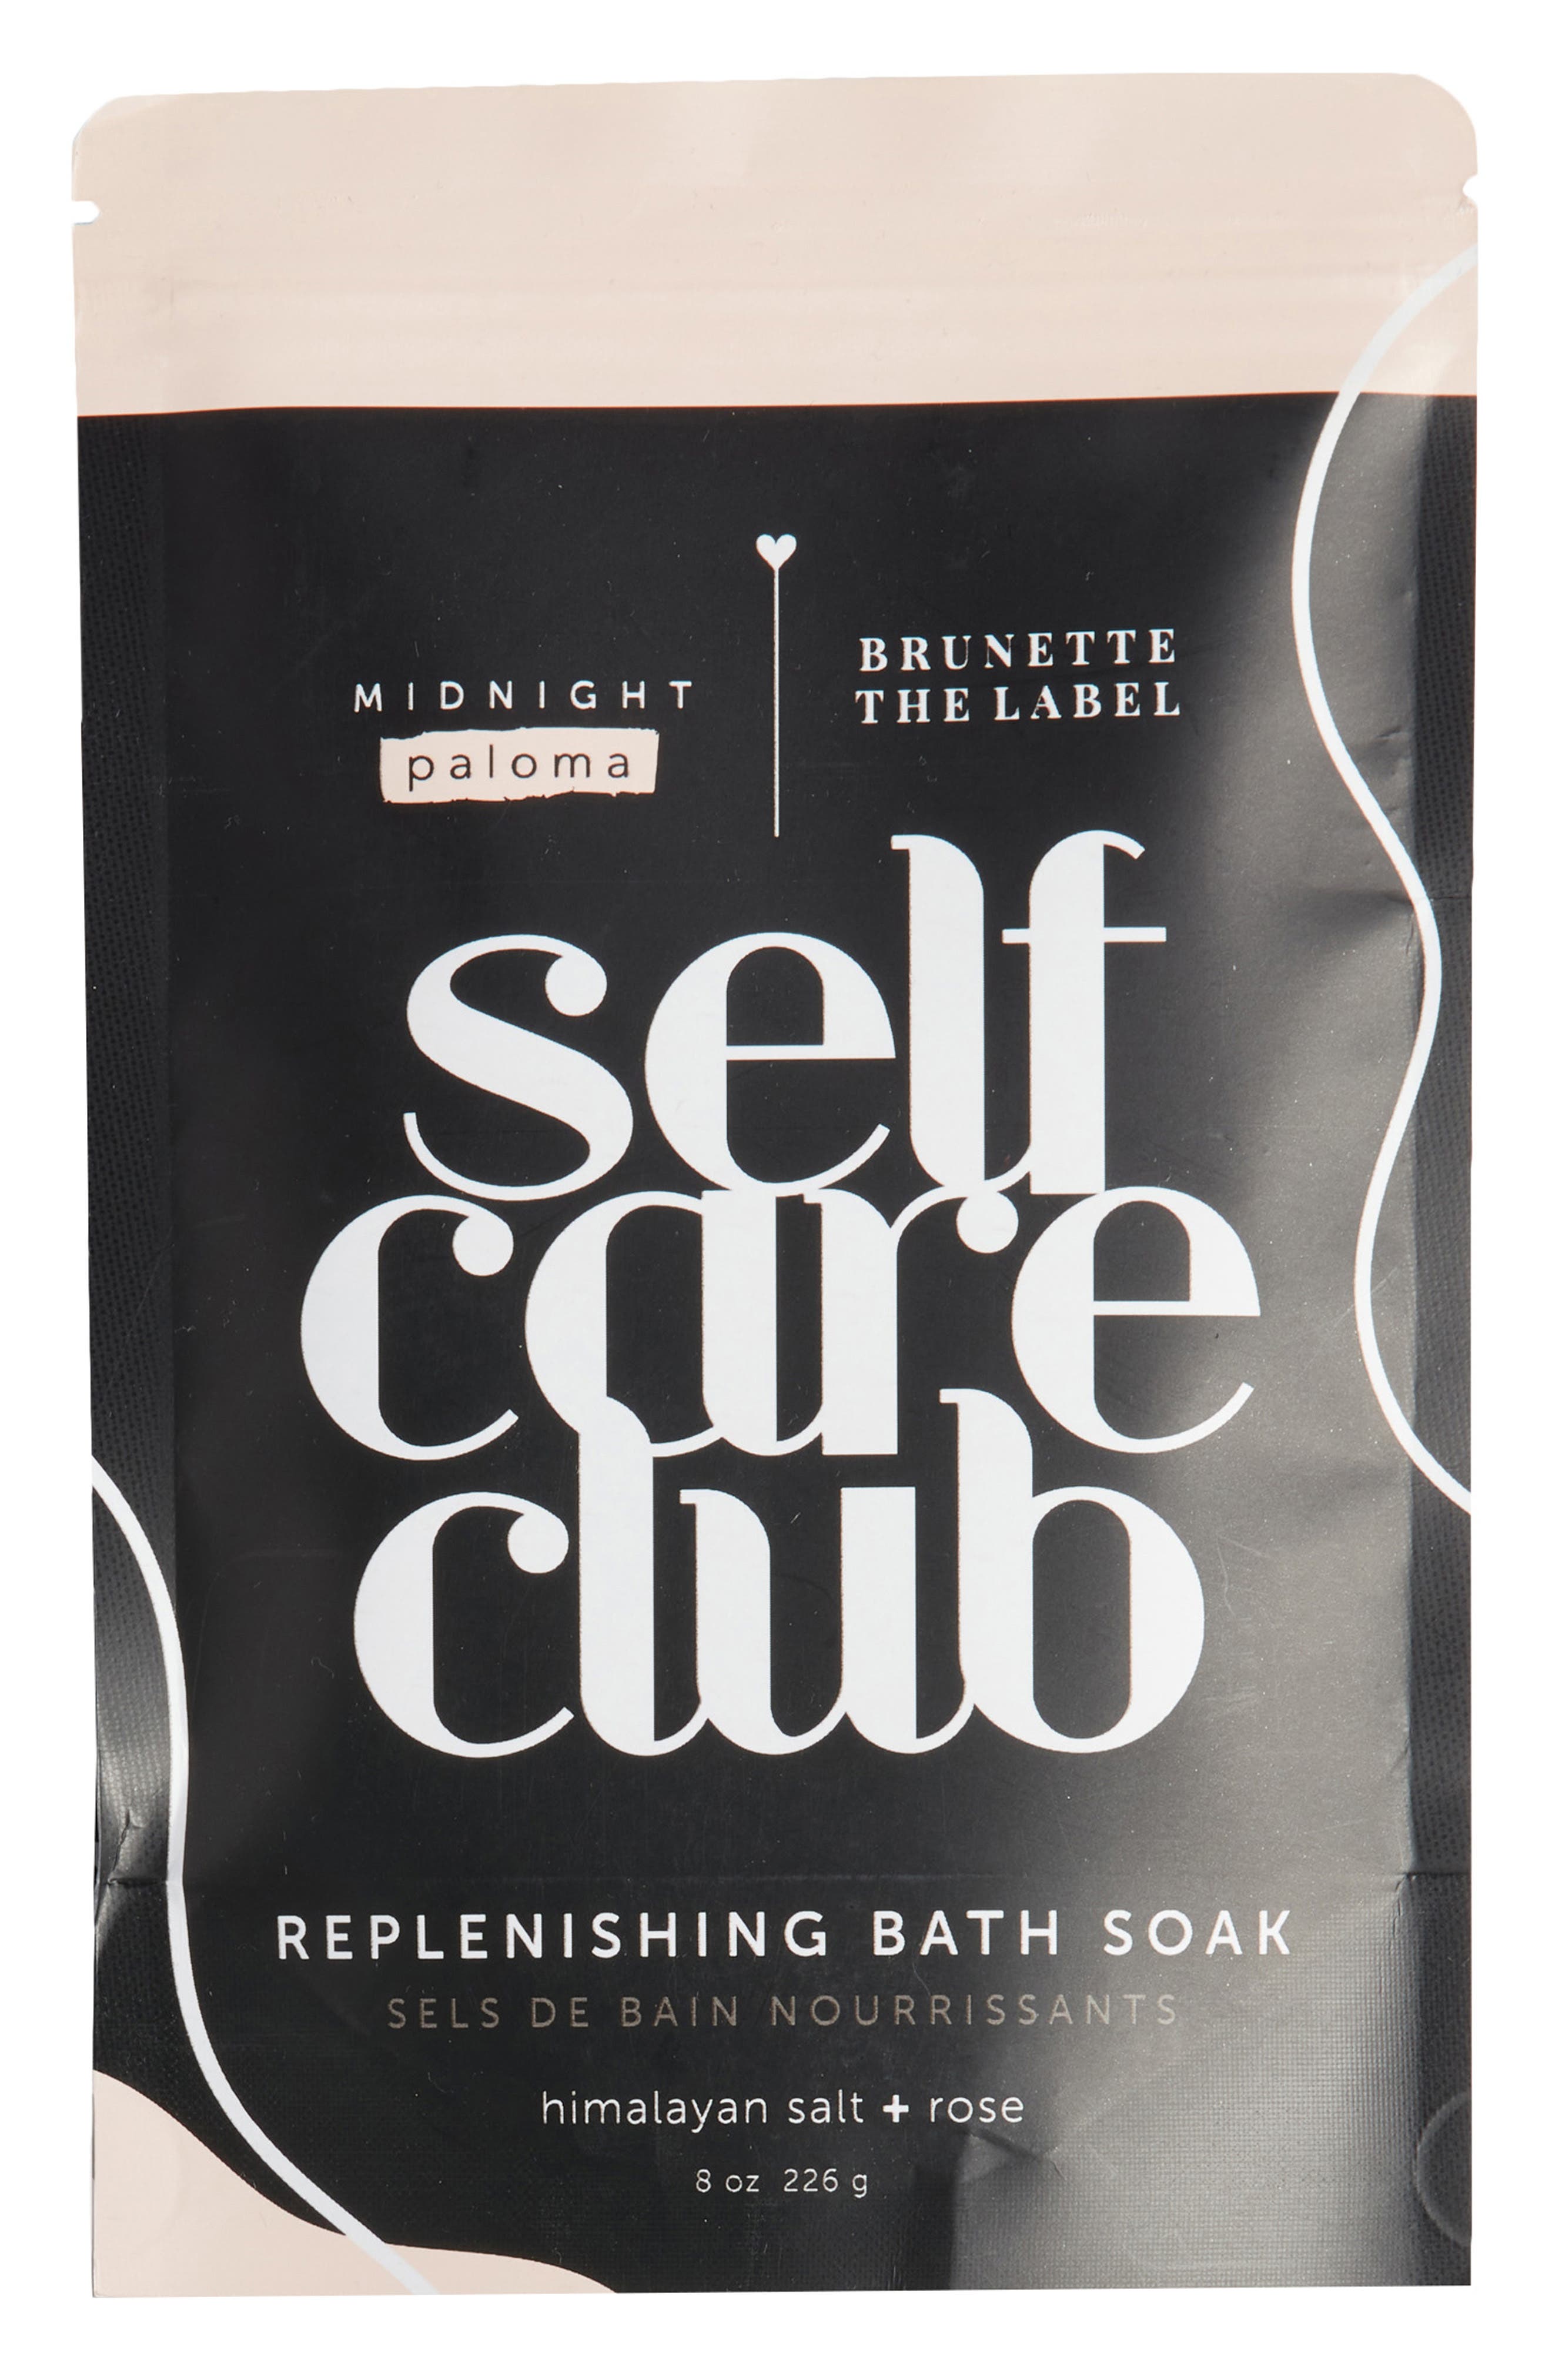 MIDNIGHT PALOMA x BRUNETTE the Label Self Care Club 2-Pack Replenishing Bath Soaks in None at Nordstrom